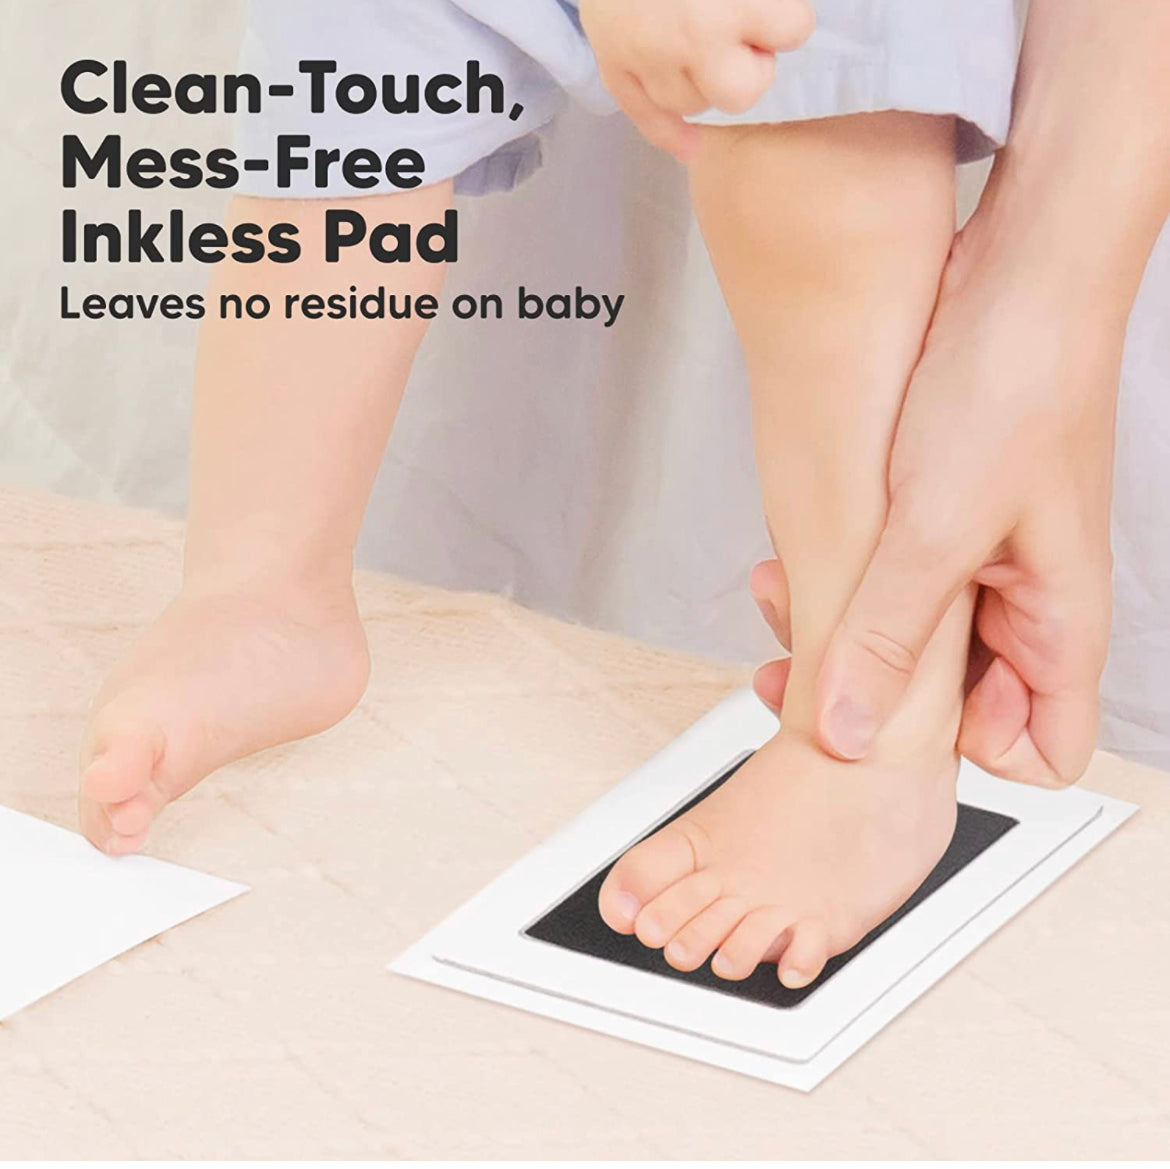 4-Pack Inkless Hand and Footprint Kit.